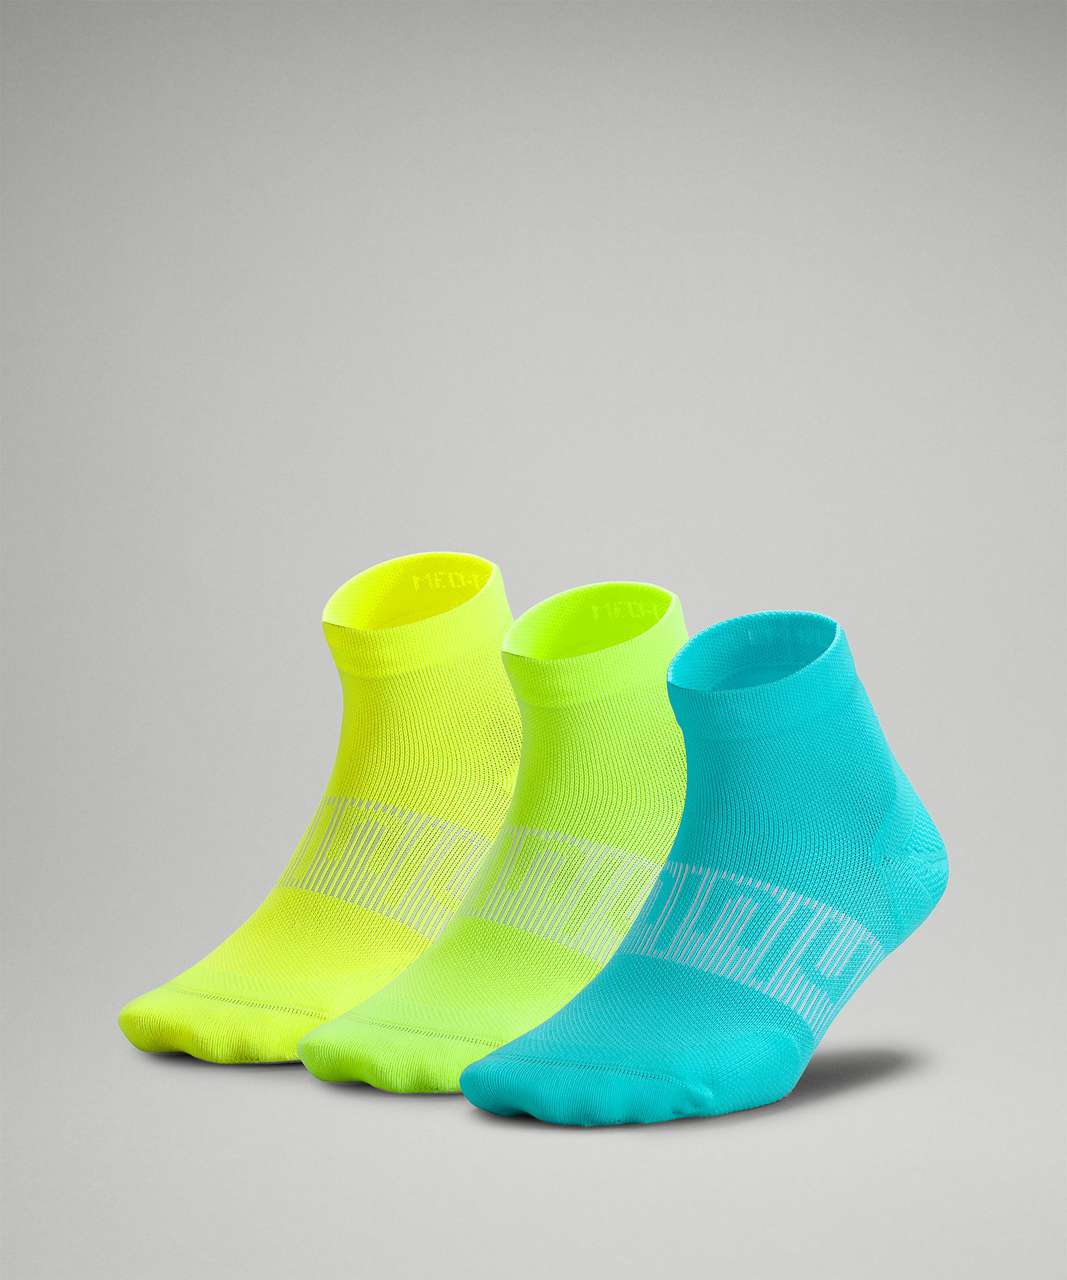 Lululemon Power Stride Ankle Sock 3 Pack - Electric Turquoise / Absinthe / Highlight Yellow